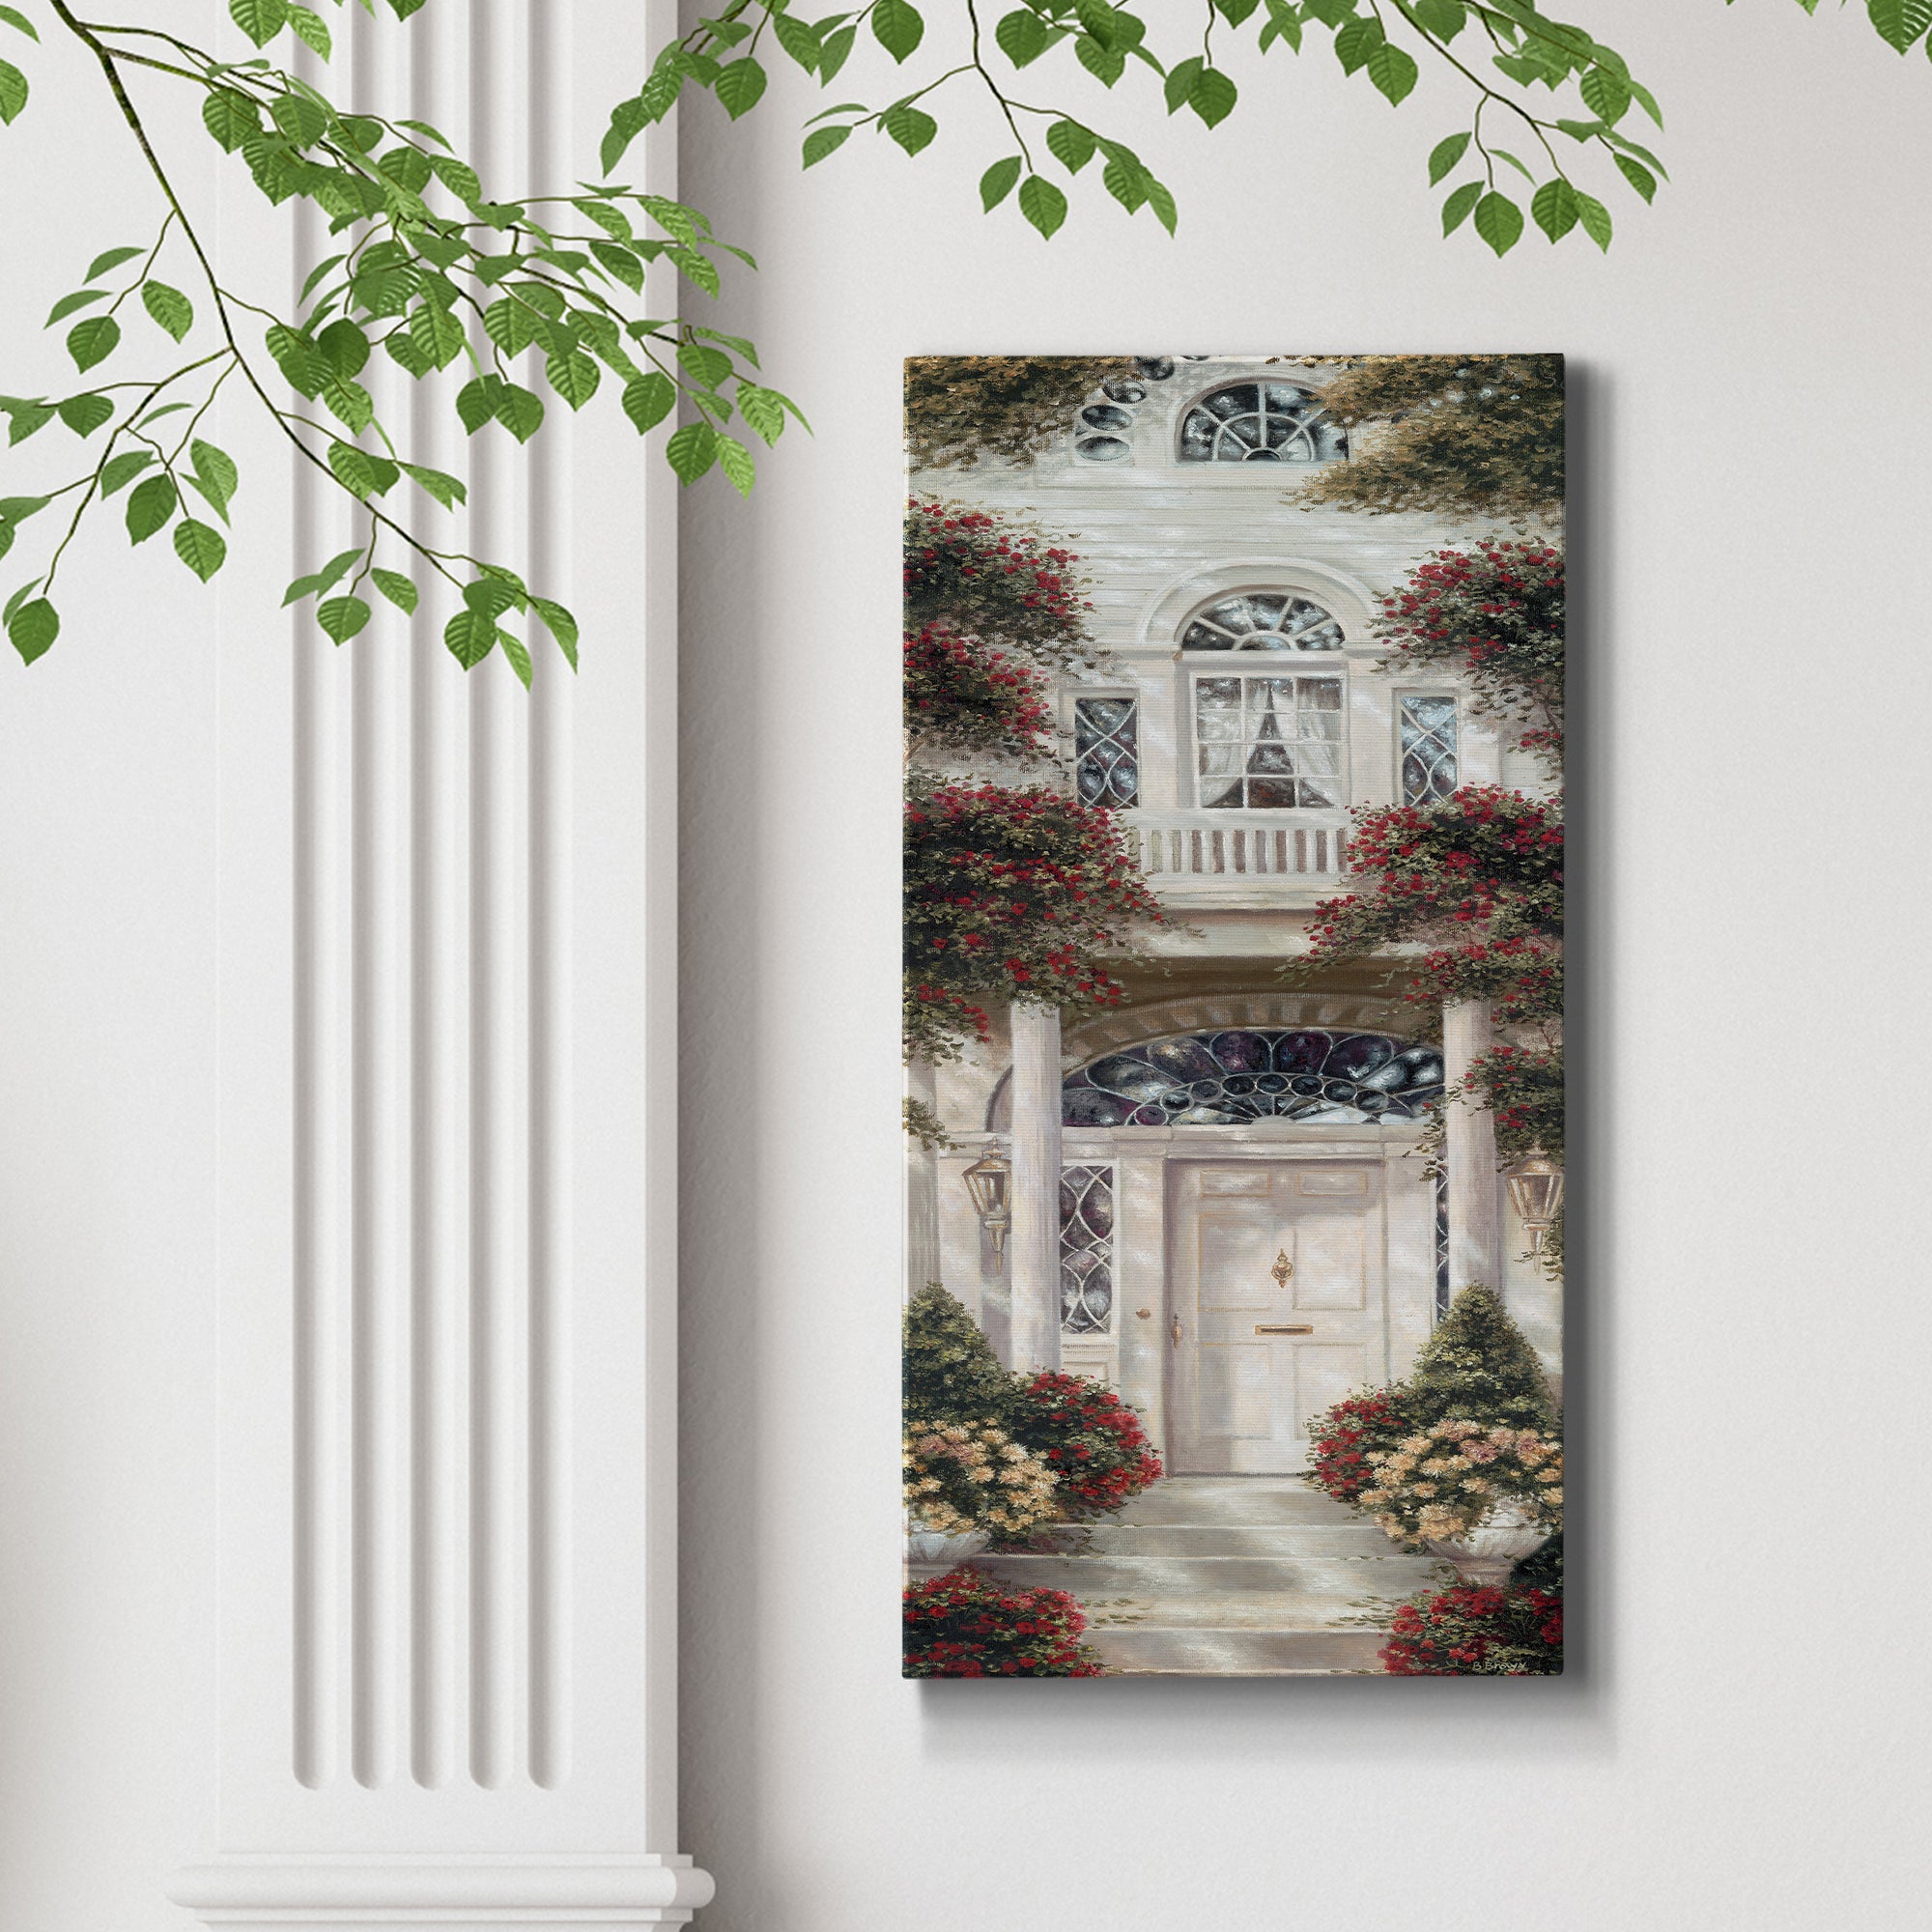 Nickels Sortwell - Premium Gallery Wrapped Canvas - Ready to Hang